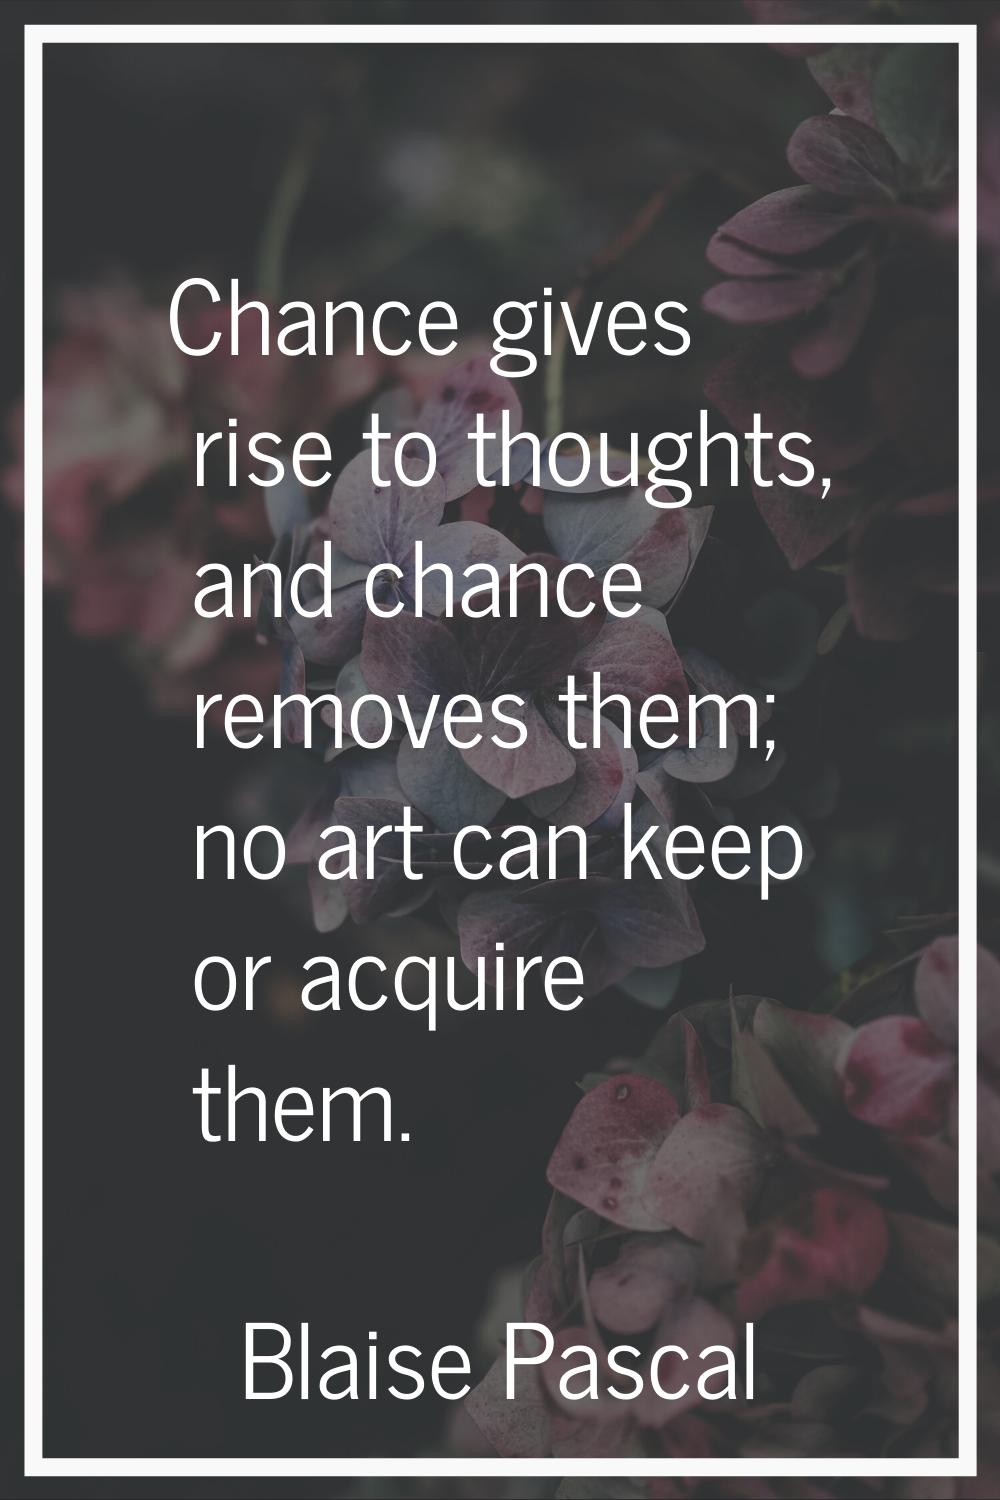 Chance gives rise to thoughts, and chance removes them; no art can keep or acquire them.